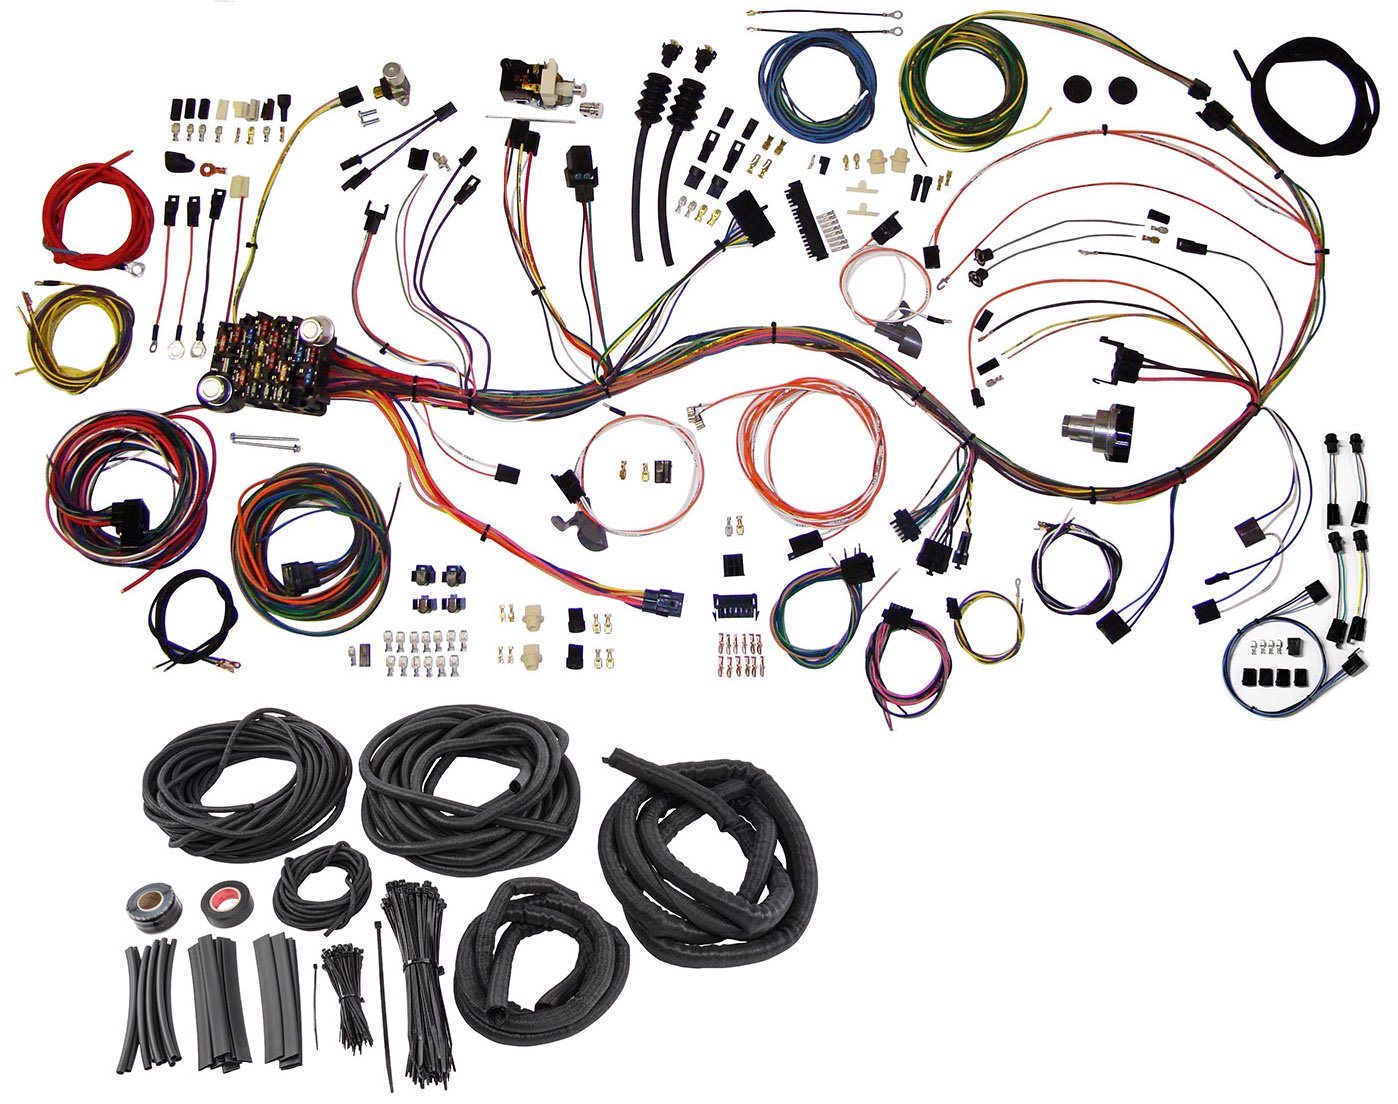 Harness & Braid Cover Kit for 1967-1968 Chevy